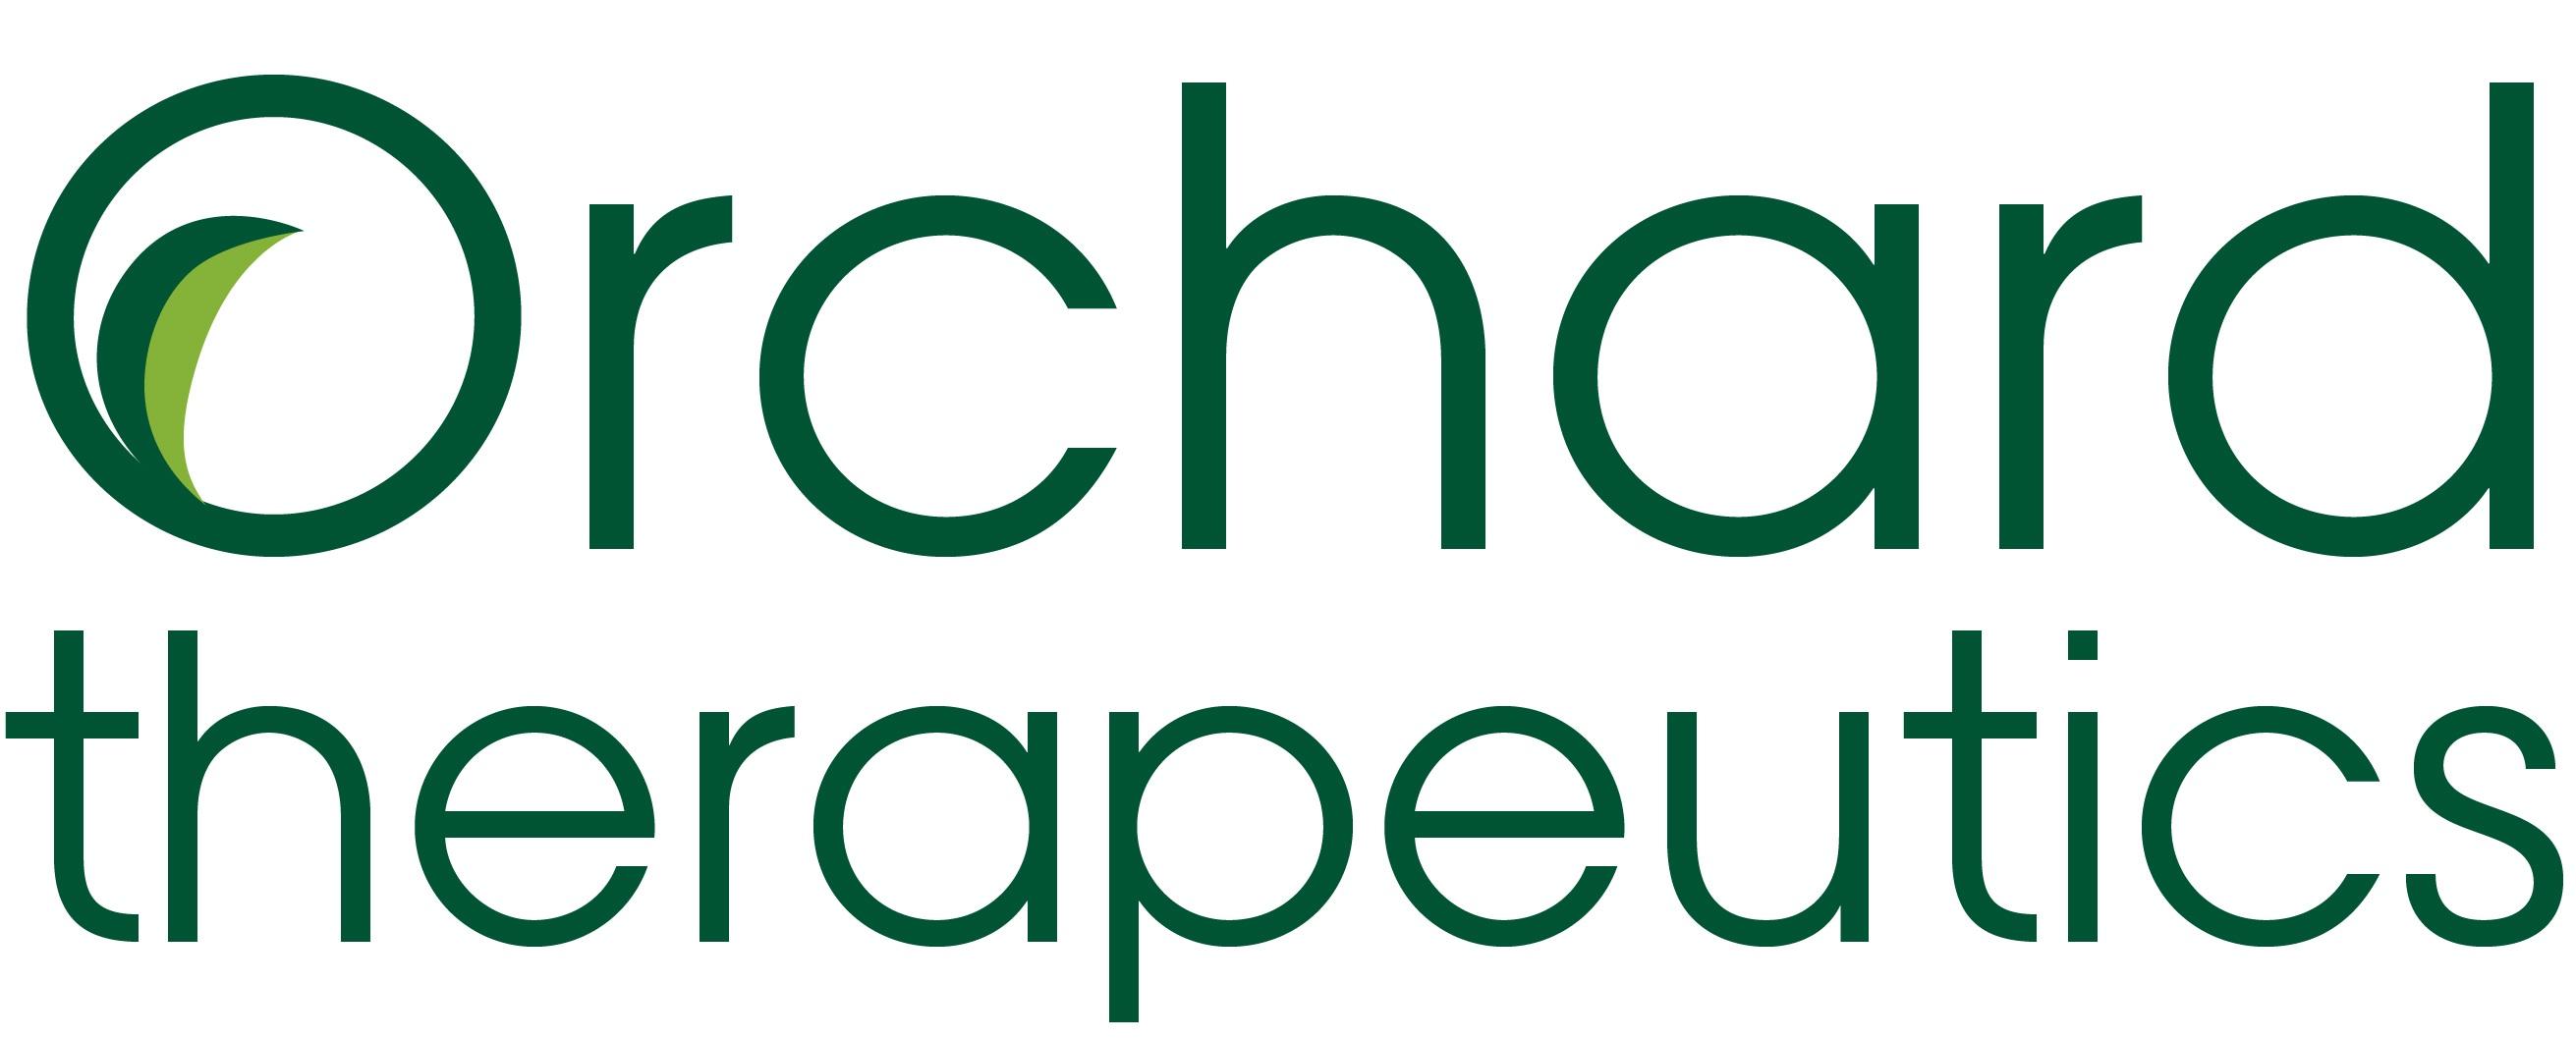 Orchard Logo - Orchard Therapeutics Announces $110M Series B Financing to Advance